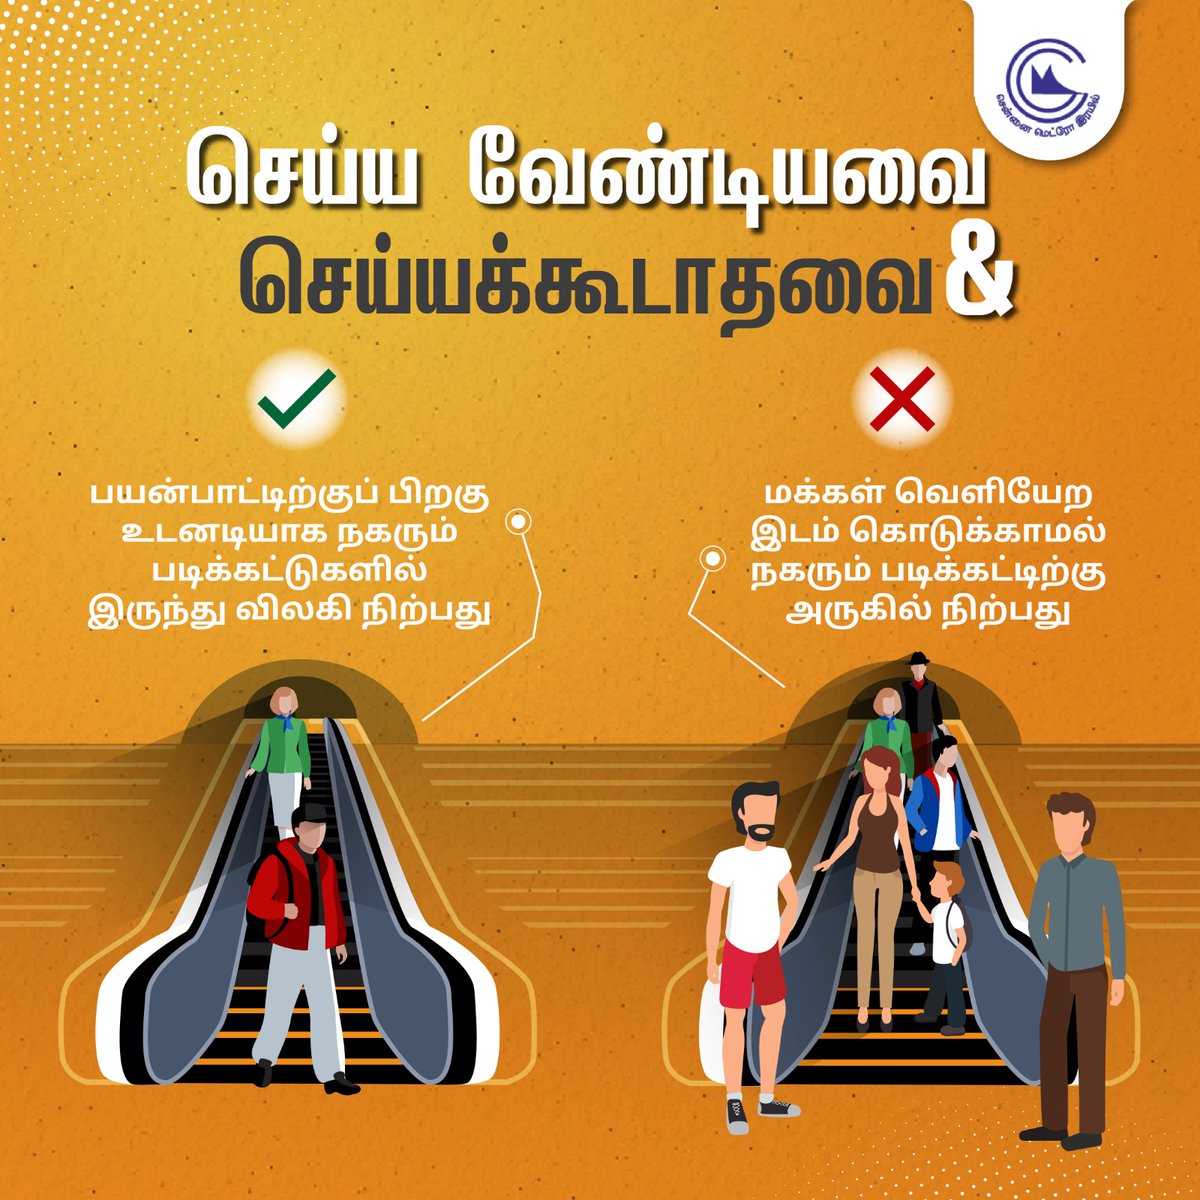 Mindful Metro Etiquettes - Let's make every #journey on the #Chennaimetro a pleasant experience for everyone aboard. #cmrl #chennai #chennaimetrorail #passengers #commute #travel #safetravel